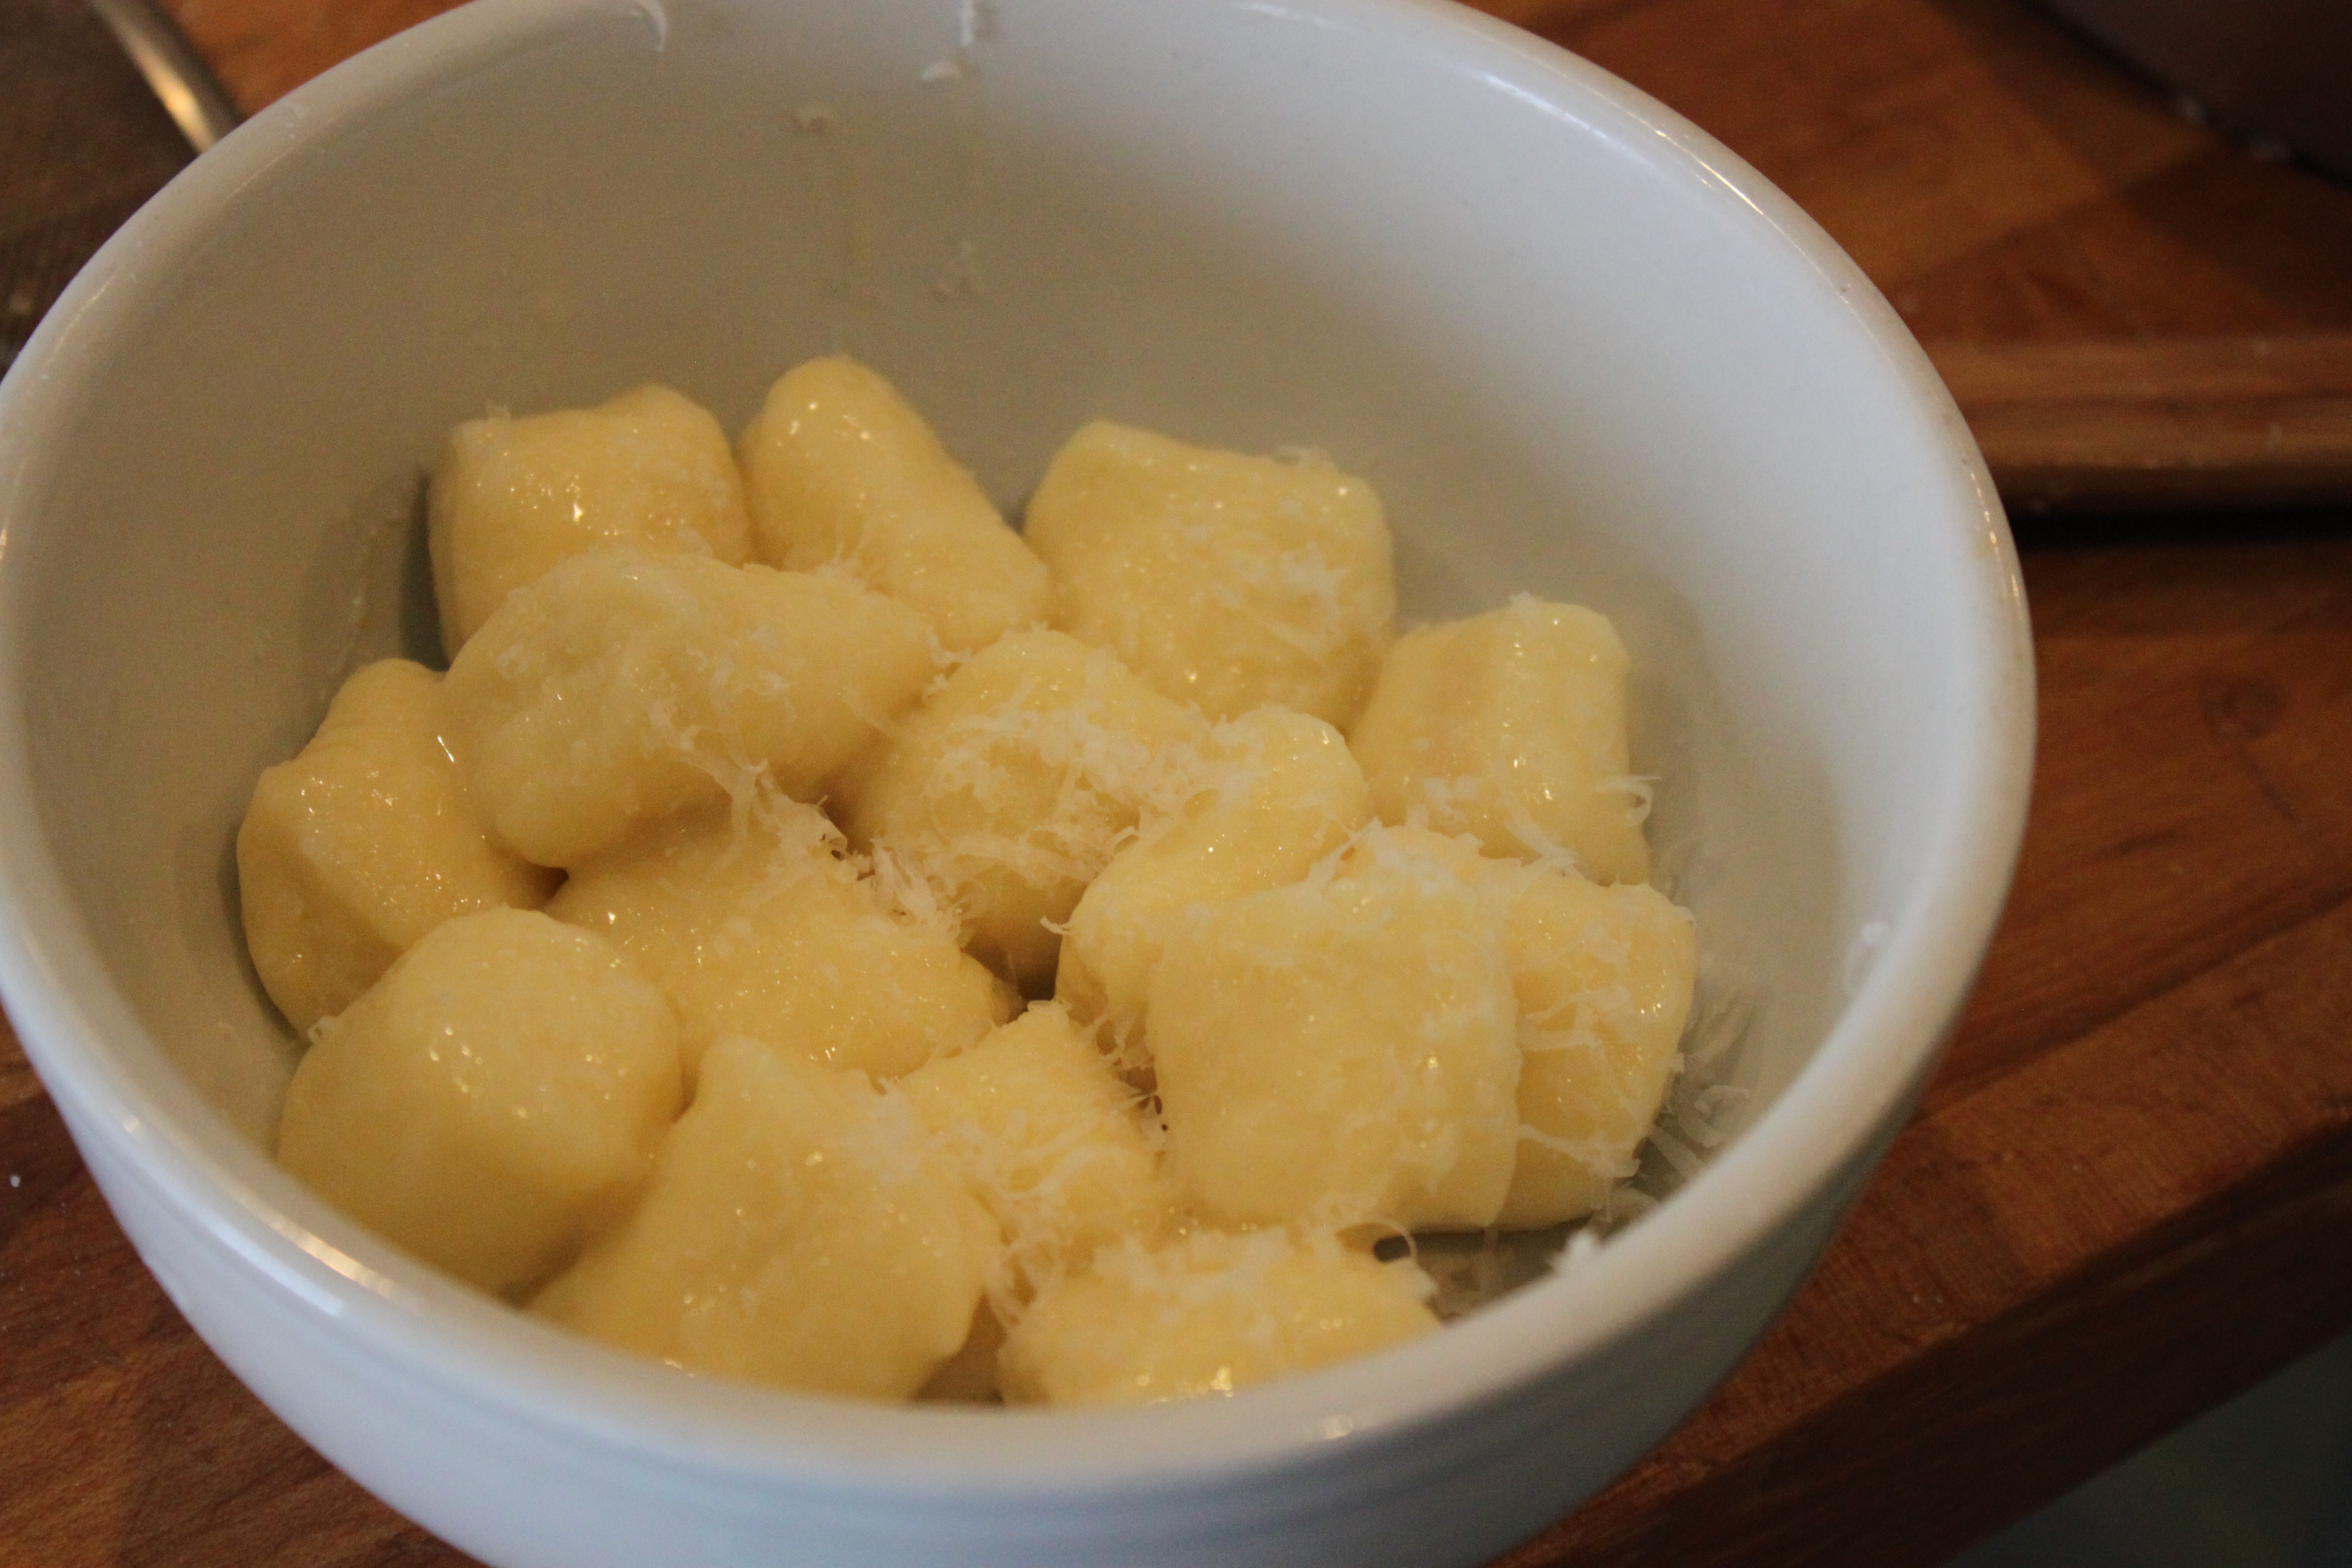 Fresh gnocchi takes about three minutes to cook in boiling water. (Photo by Lisa Phu/KTOO)